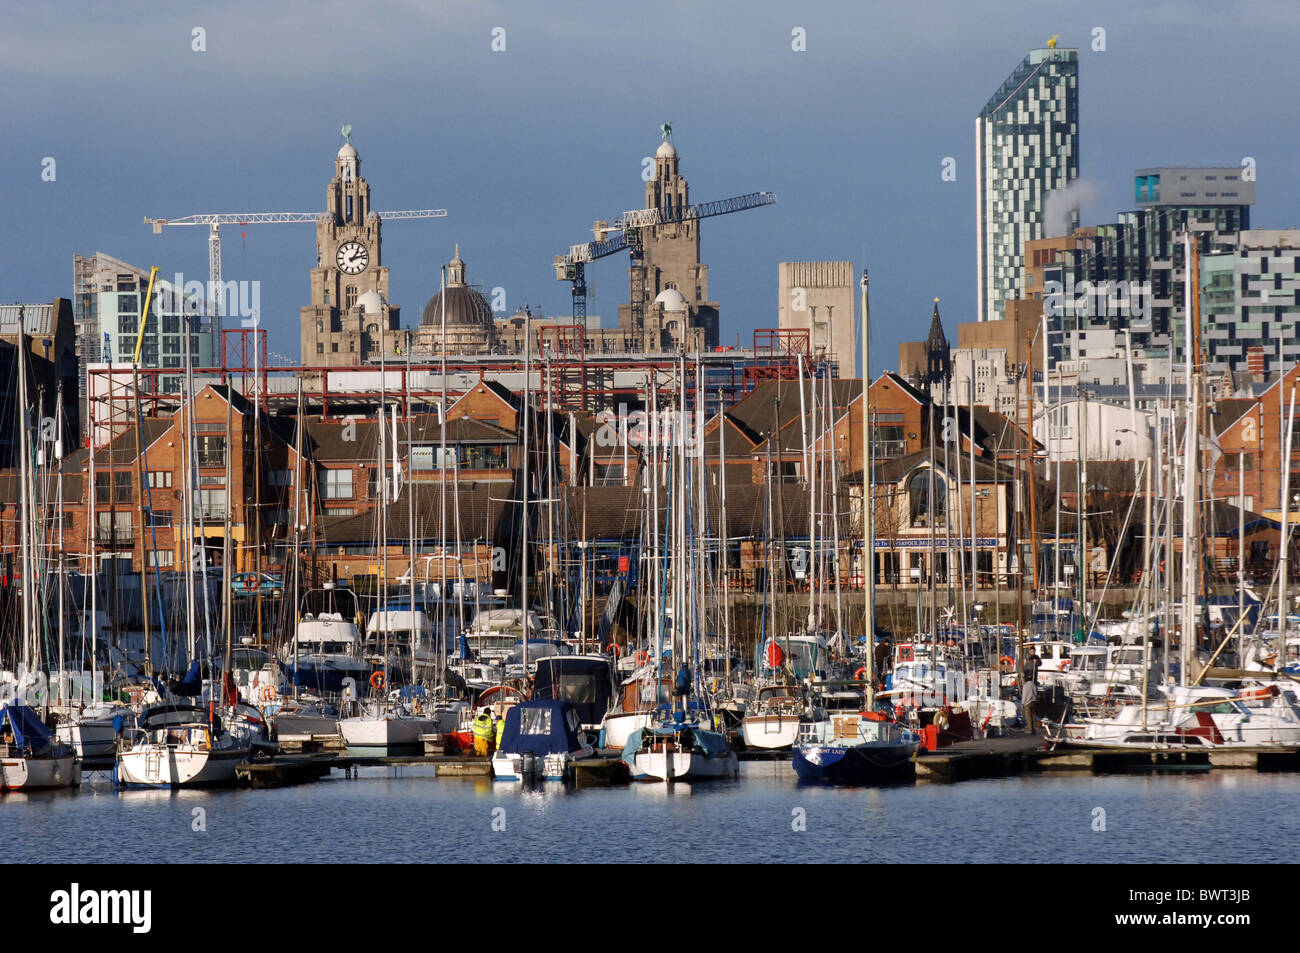 A view looking towards Liverpool Marina and Liverpool City Centre. Stock Photo